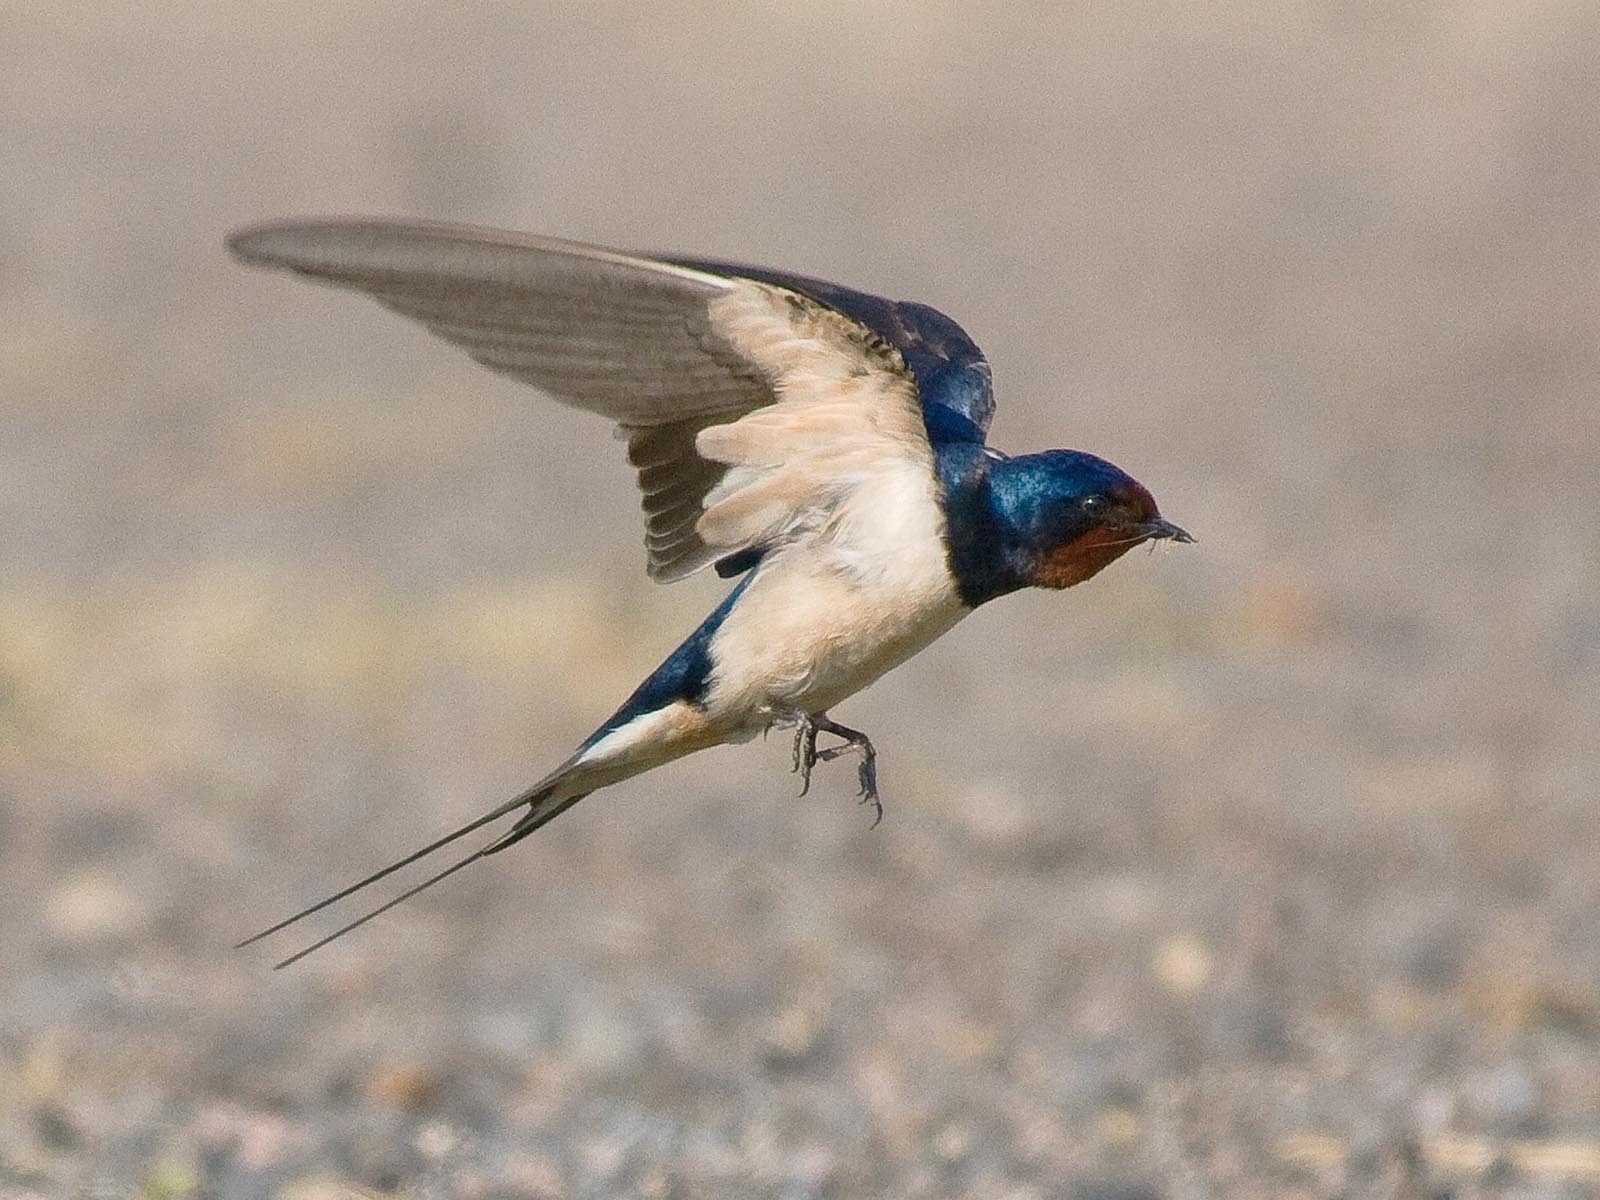 Barn Swallow | Photo Credit: Denise Coyle